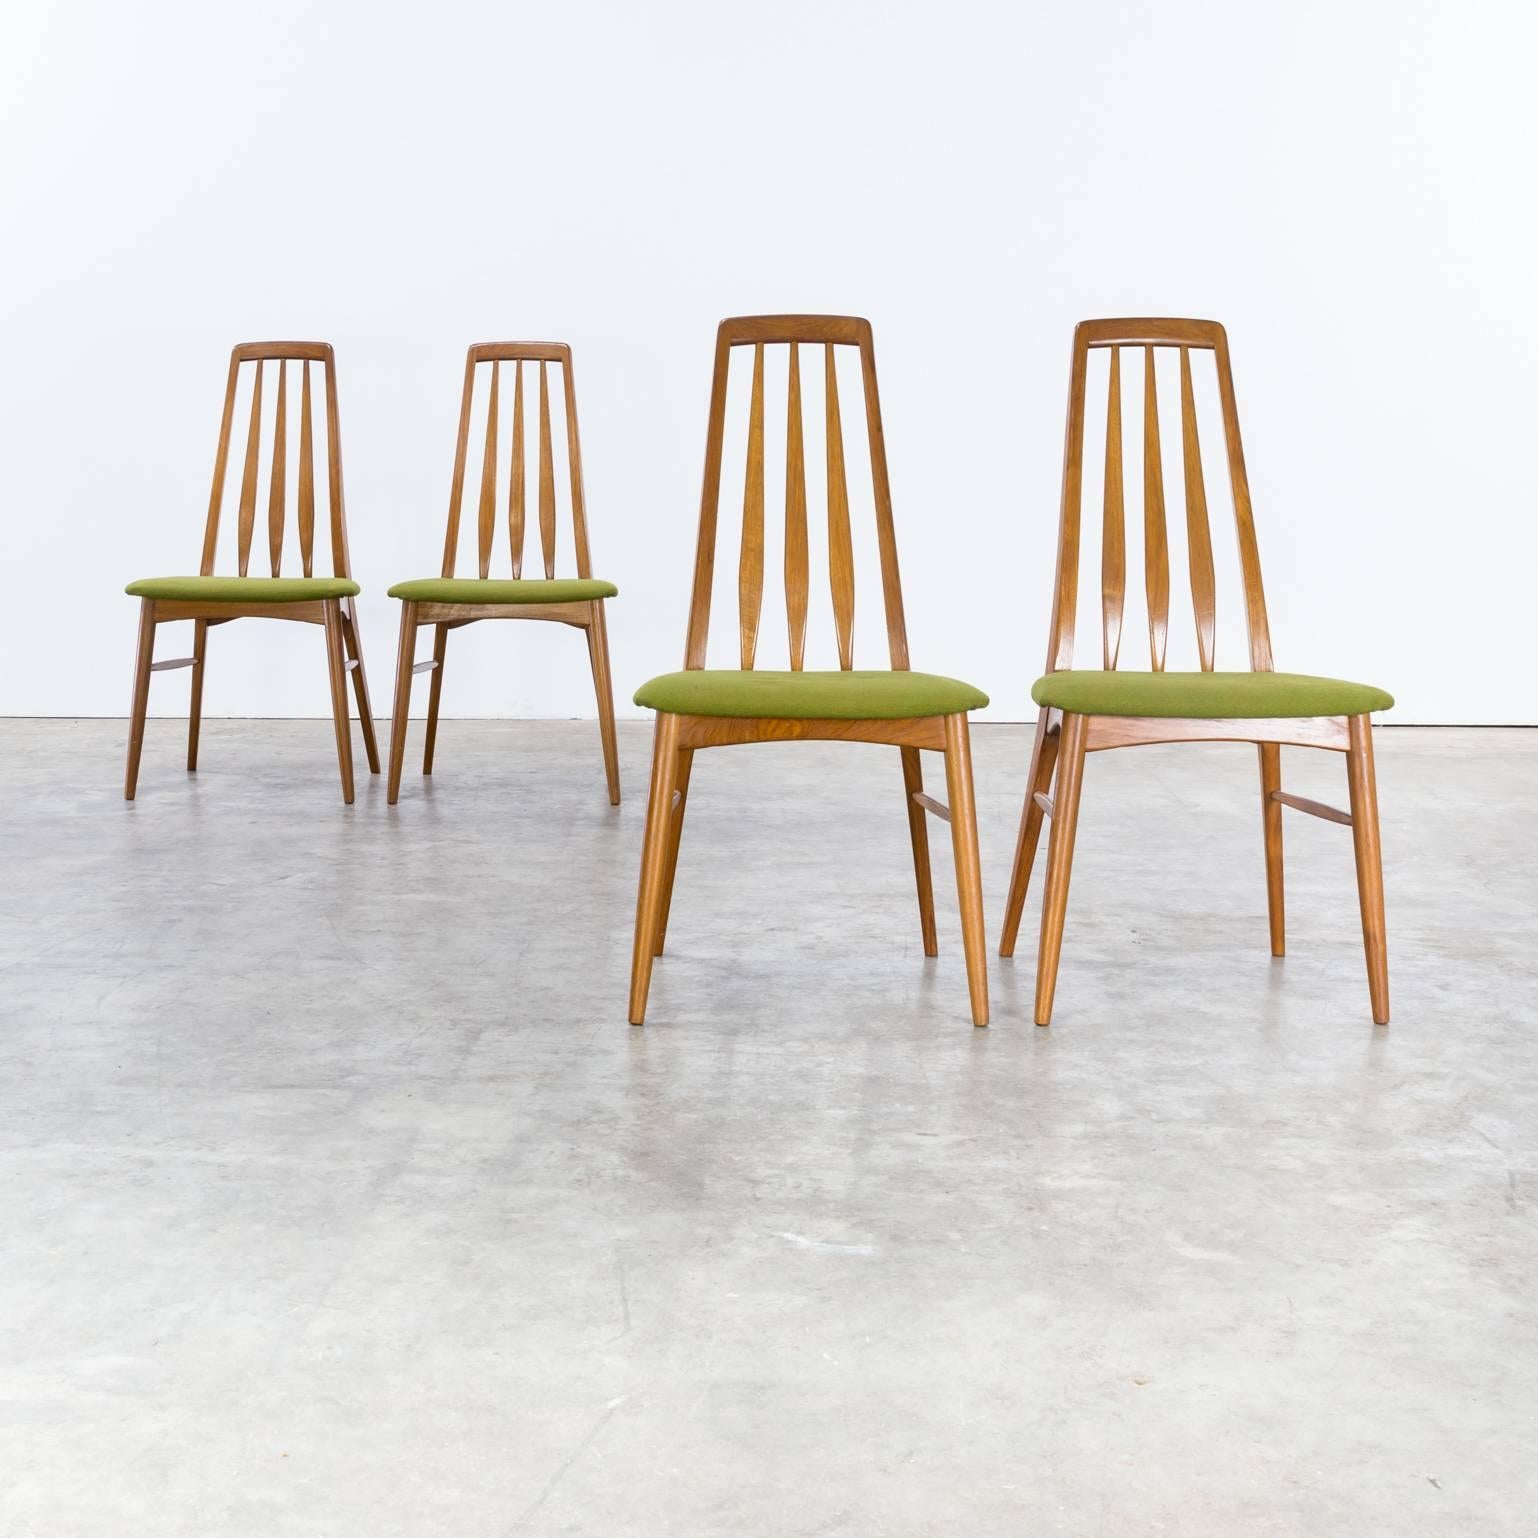 Danish 1970s Niels Koefoed ‘Eva’ Dining Chairs for Koefoed Hornslet Set of Four For Sale